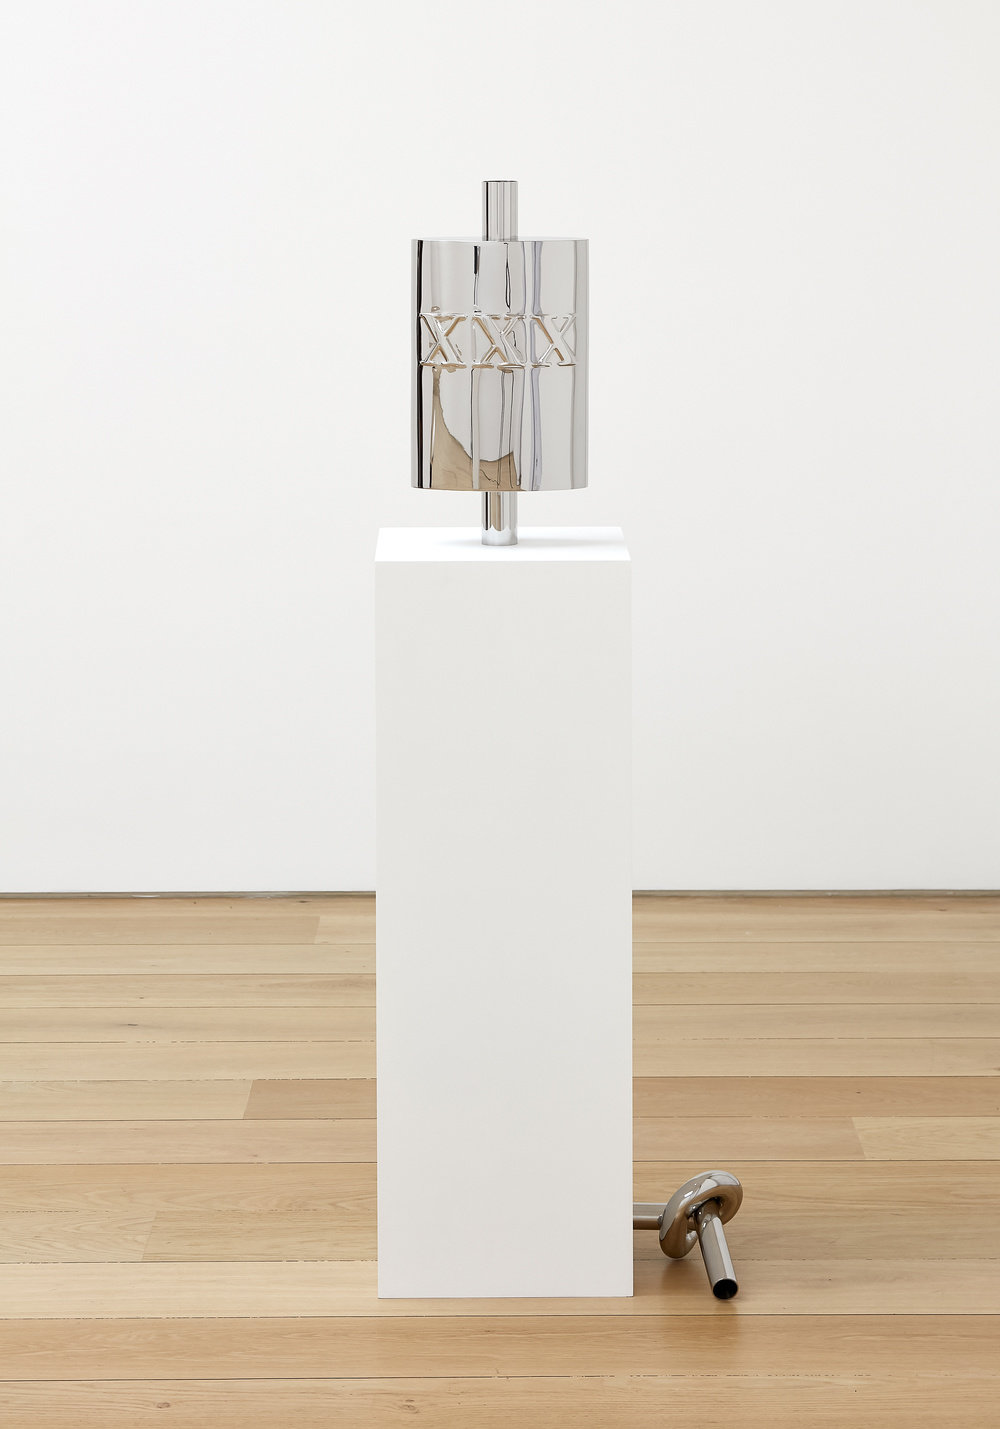 Lee, i mean it when i say xxx, 2017, polished stainless steel, wood, edition of 3, 61 3 8 x 13 1 4 x 19 5 8 in., 156 x 35 x 50 cm, cnon 59.710